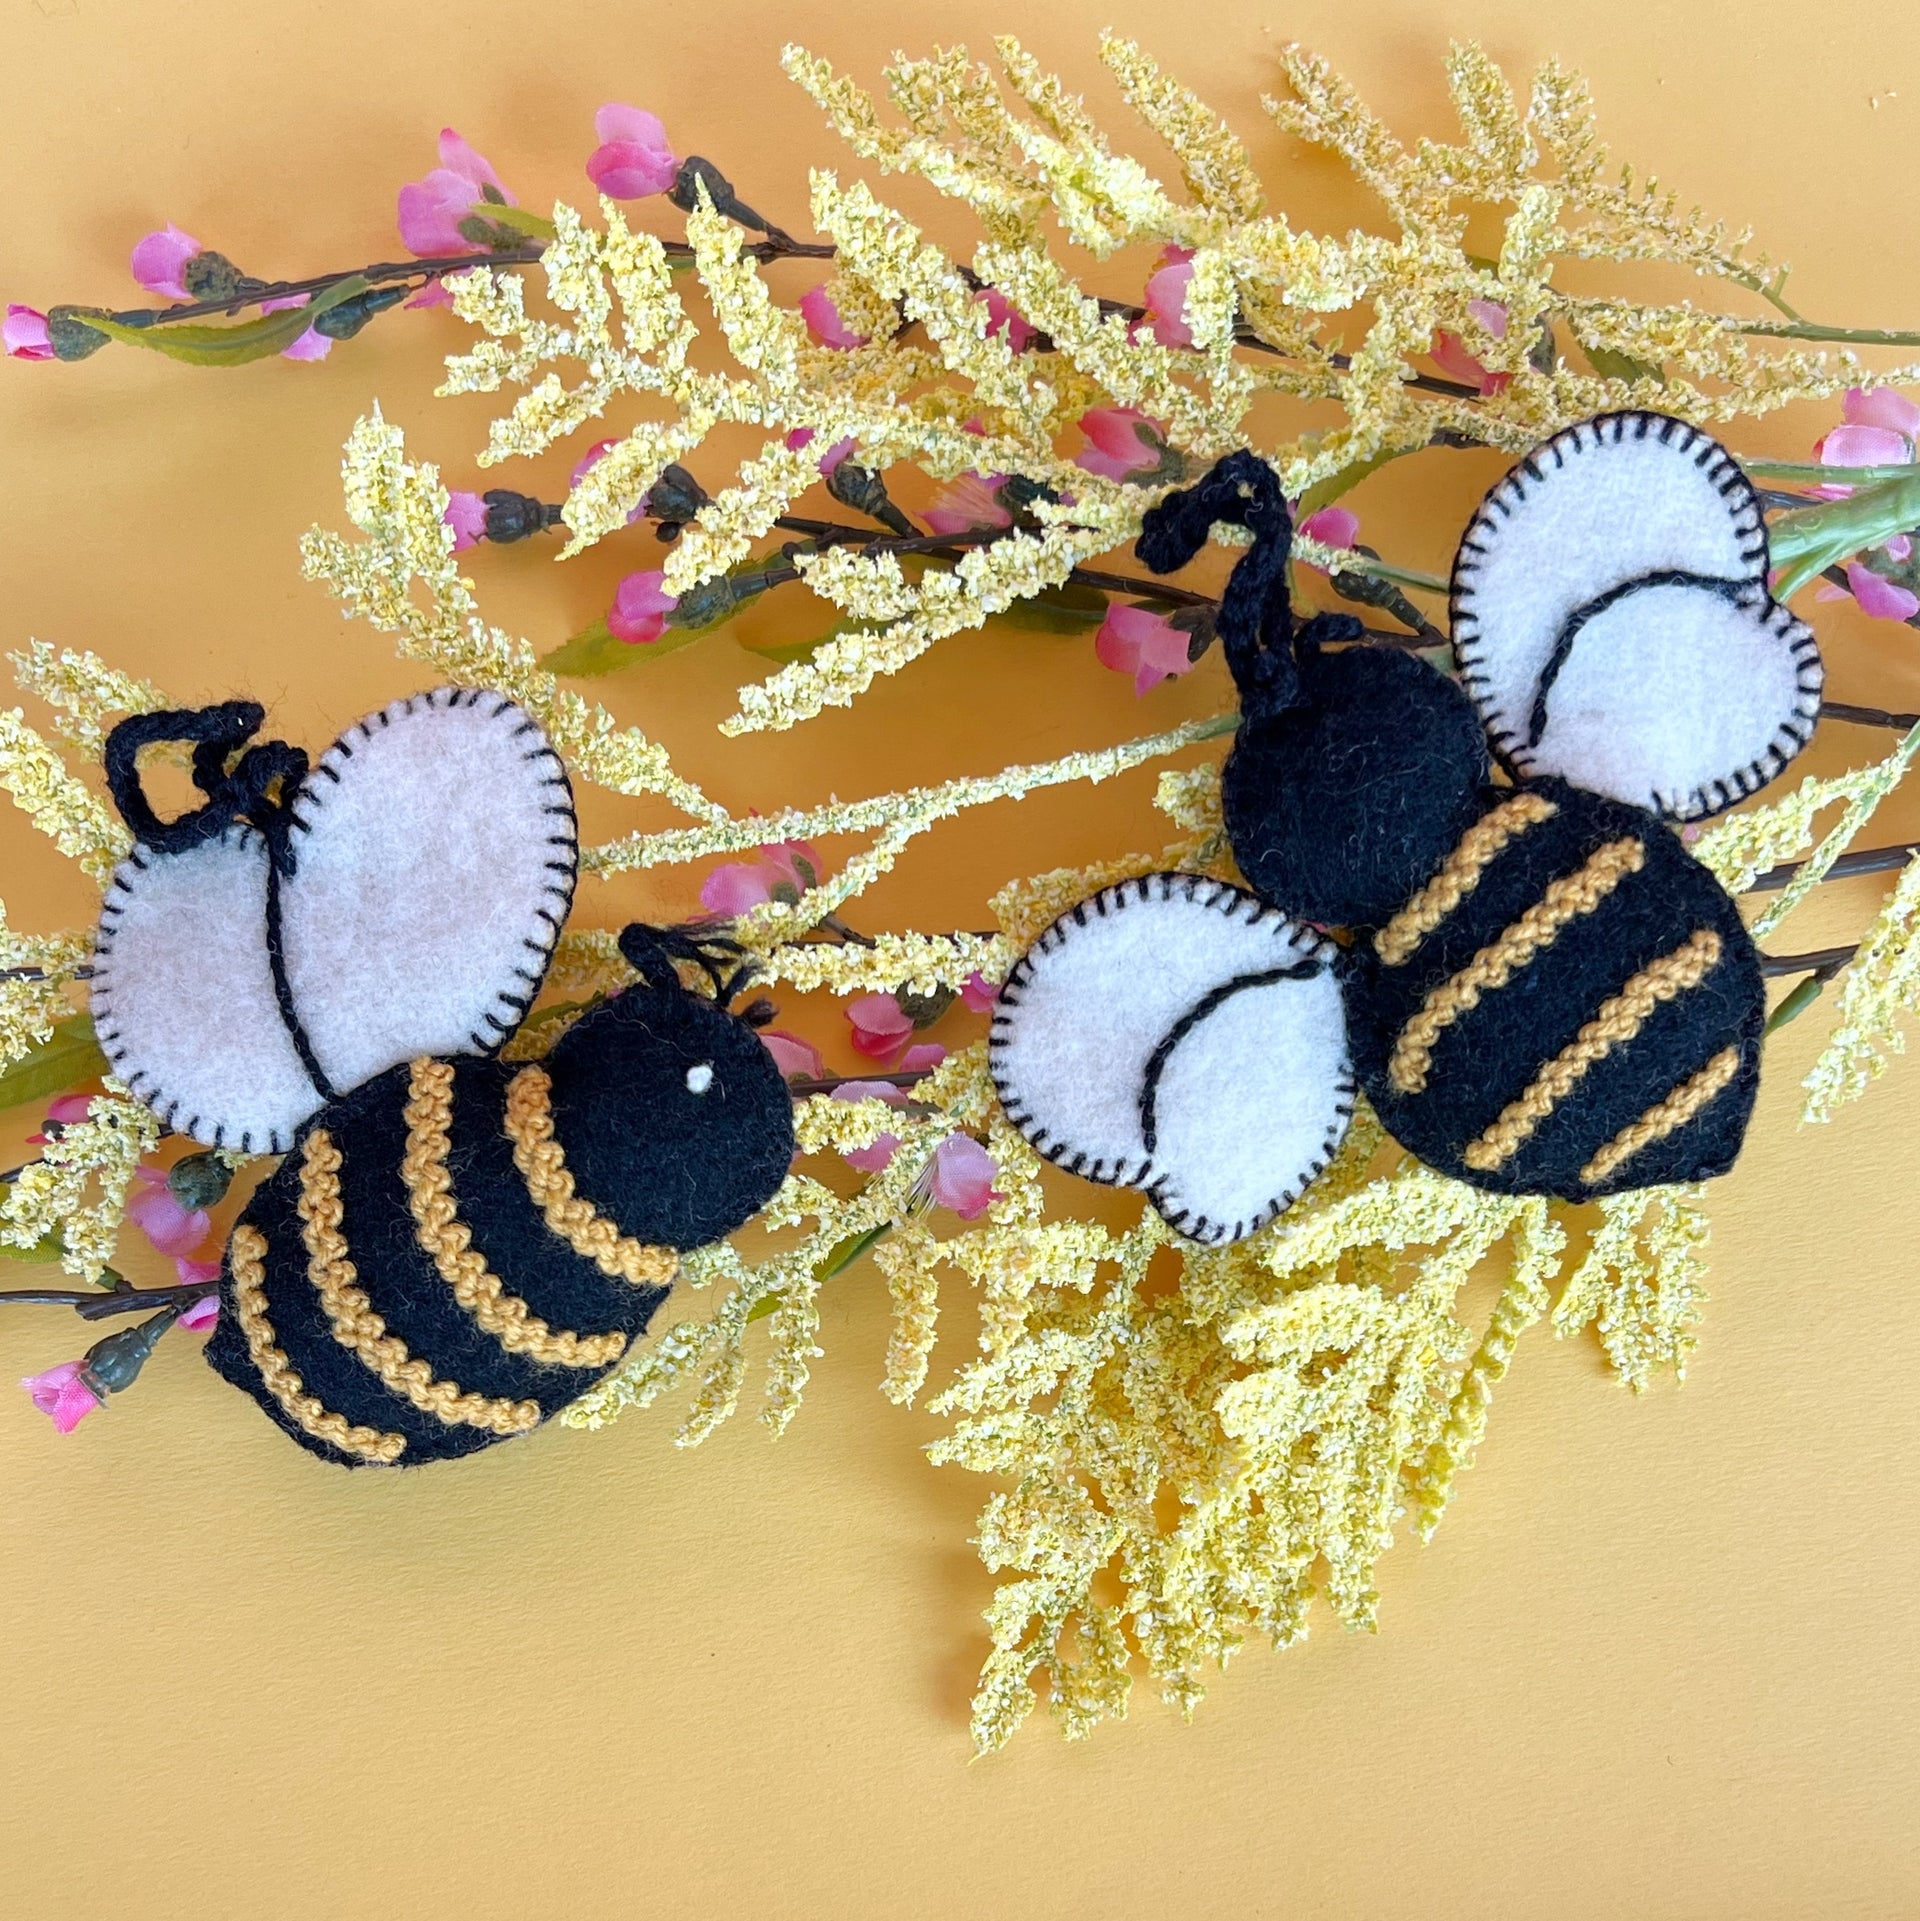 Two embroidered bee ornaments resting on yellow flowers.